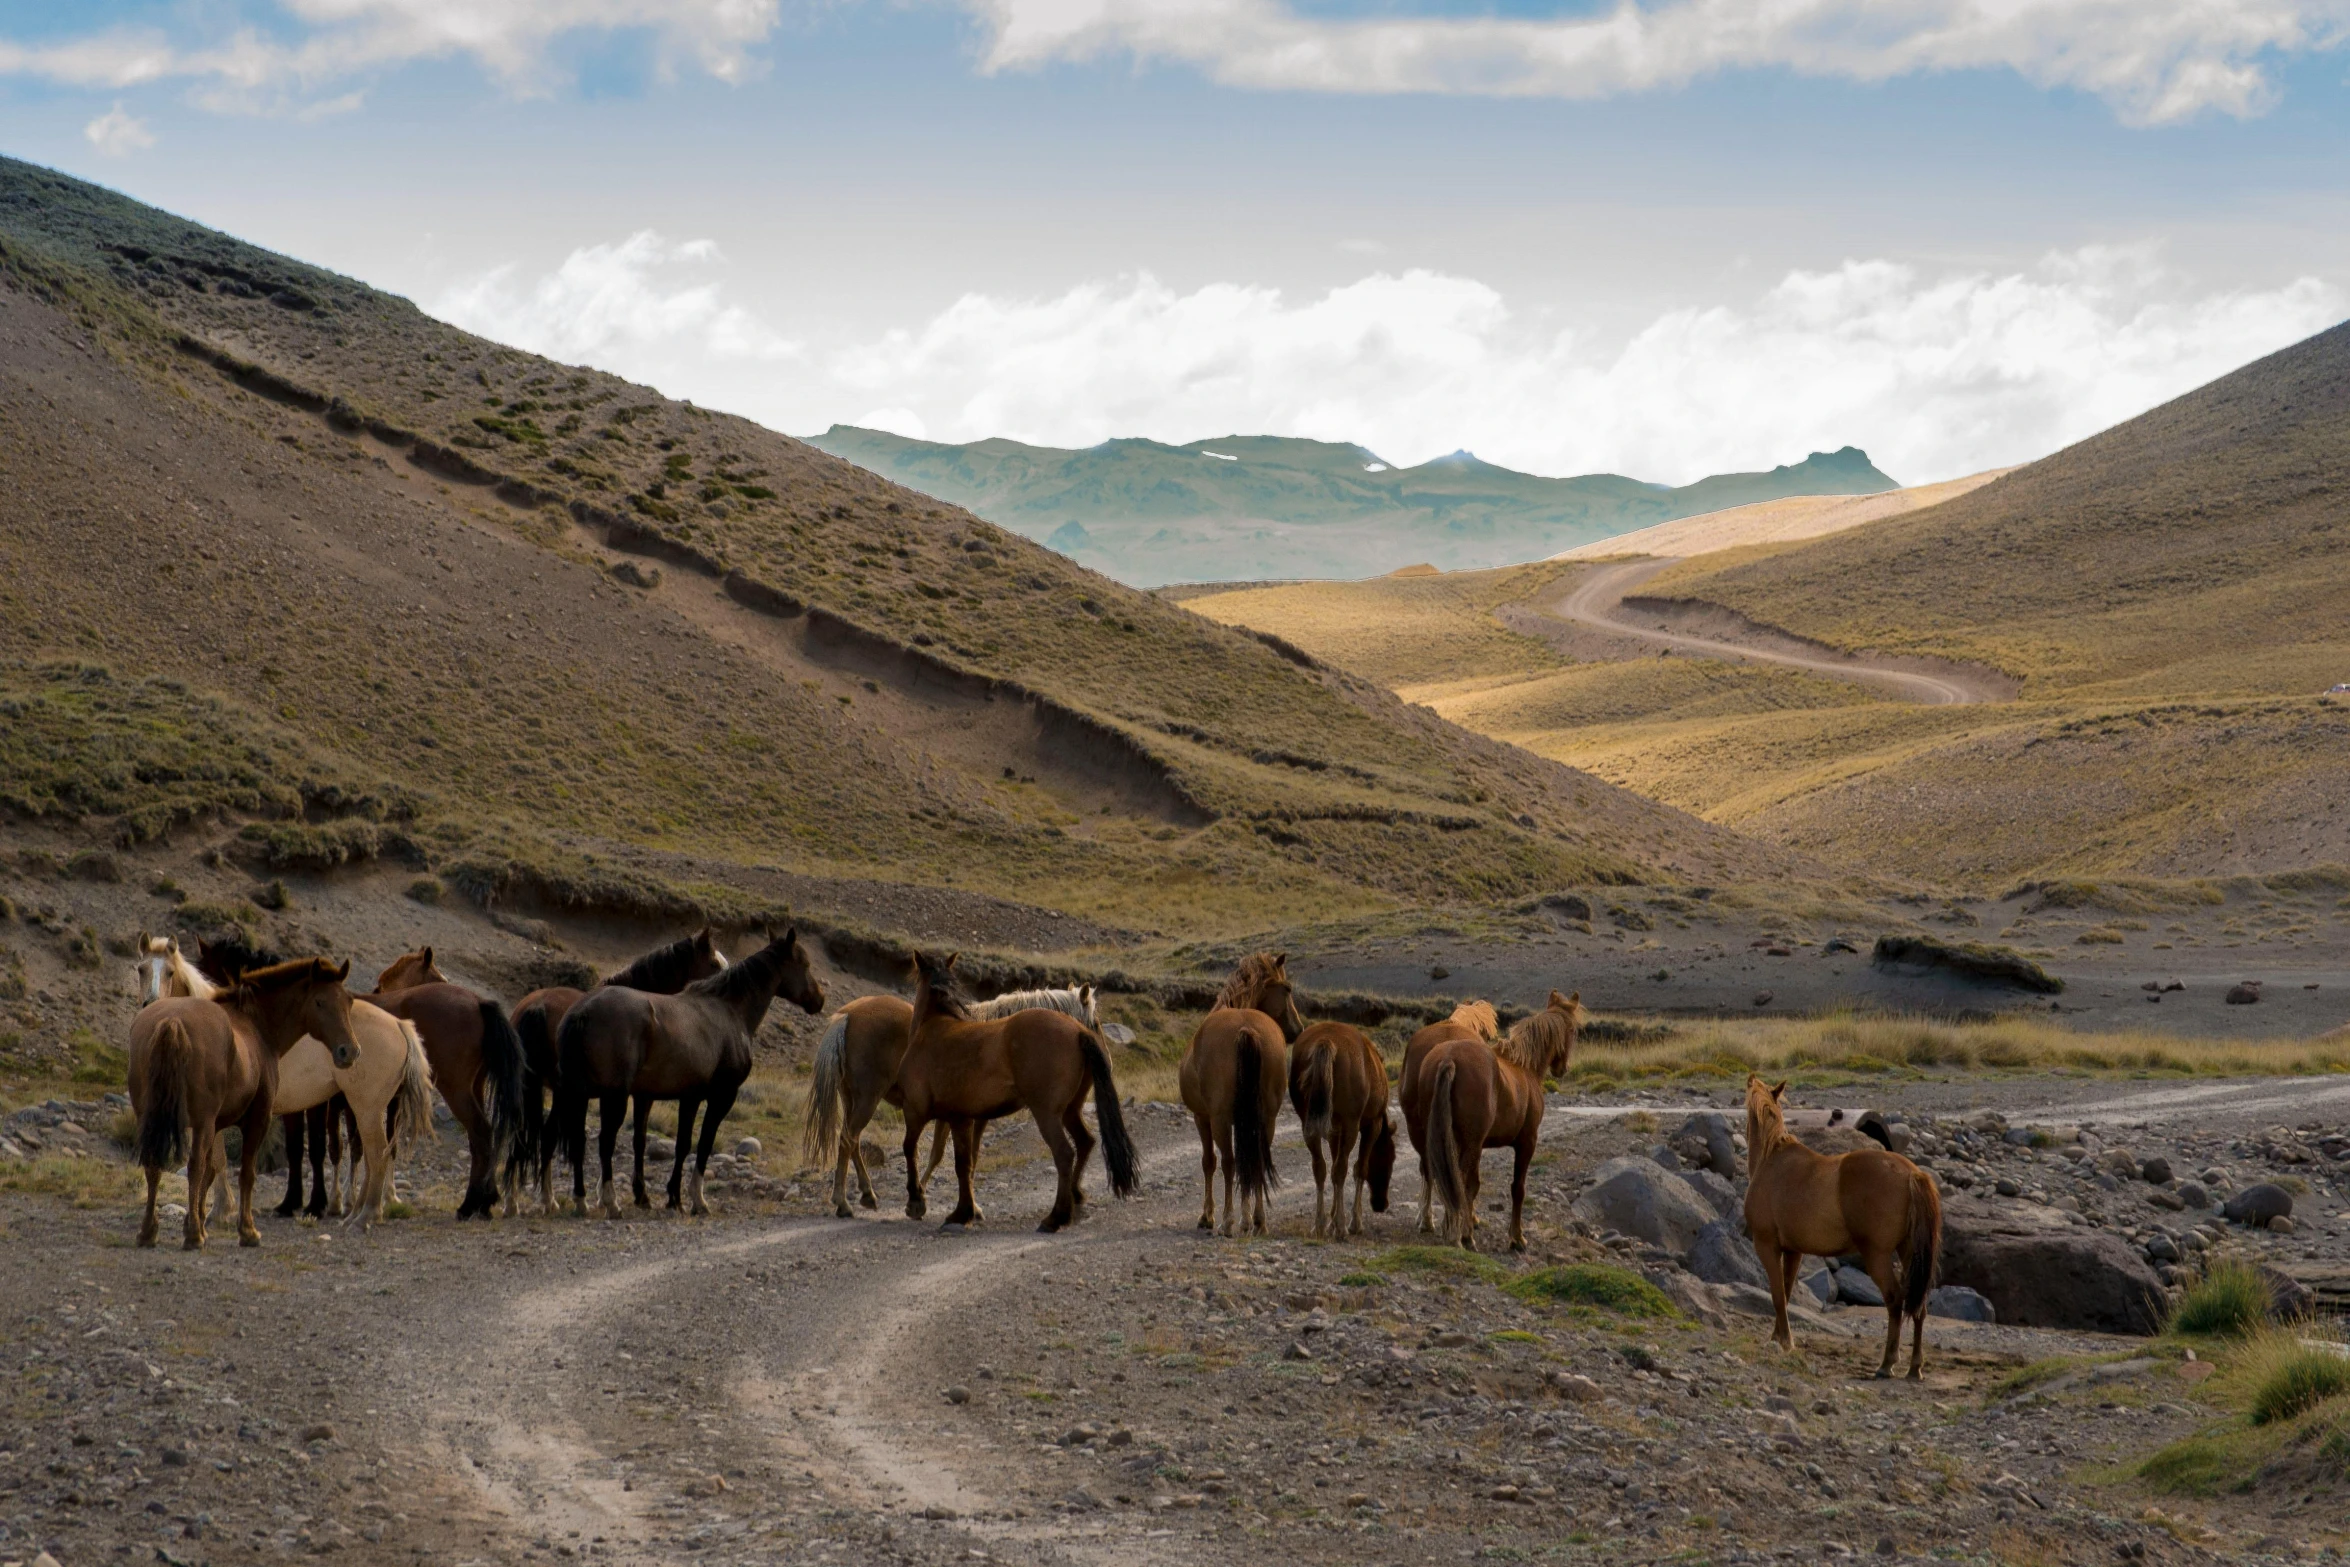 some horses and mules are out in the open on the side of a road